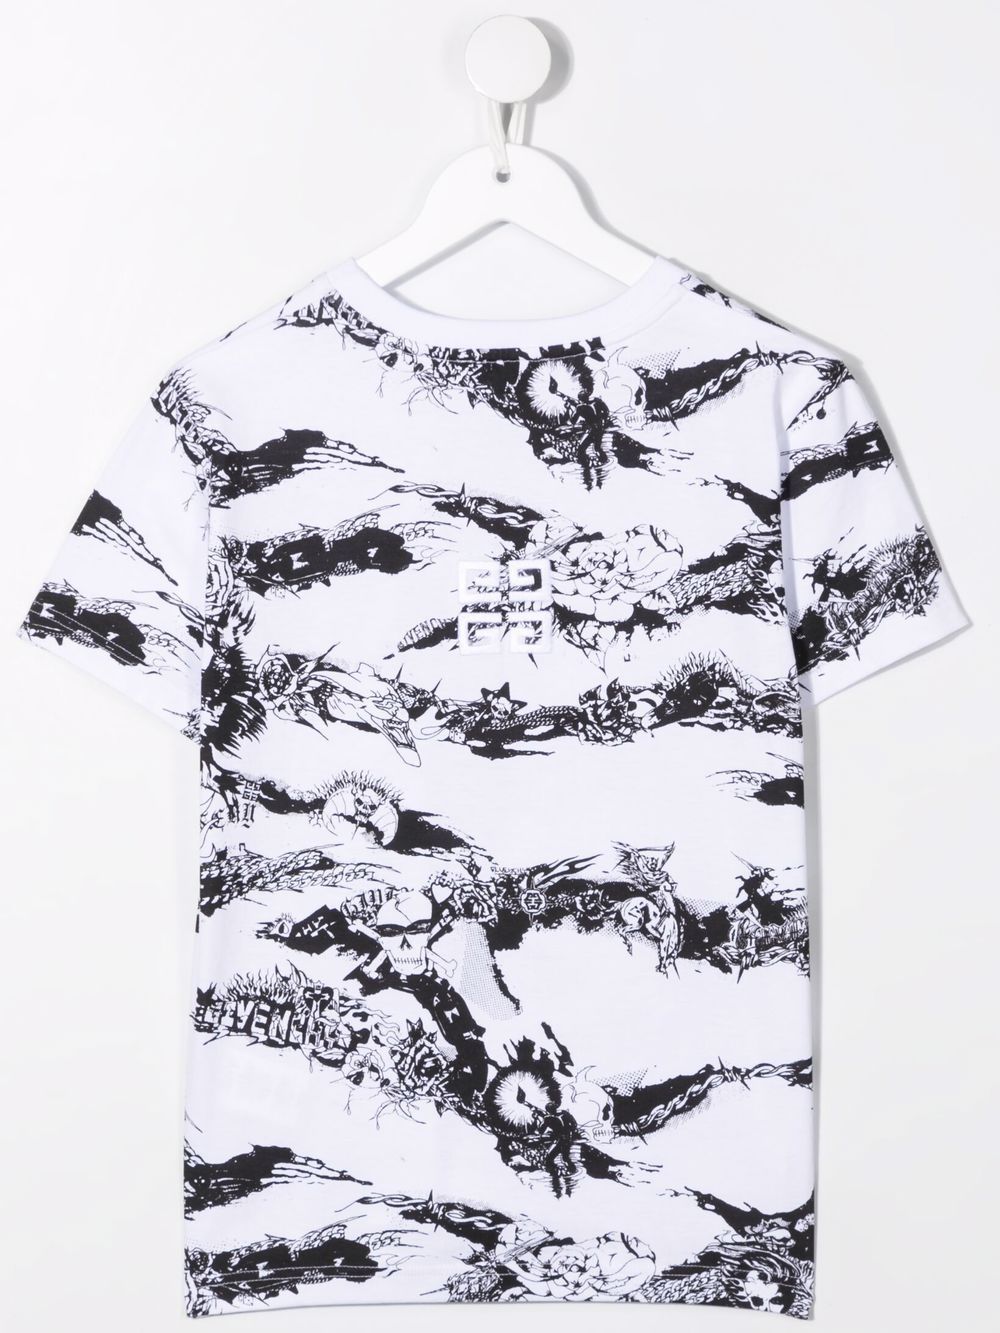 Givenchy Kids T-shirt met abstracte print - Wit